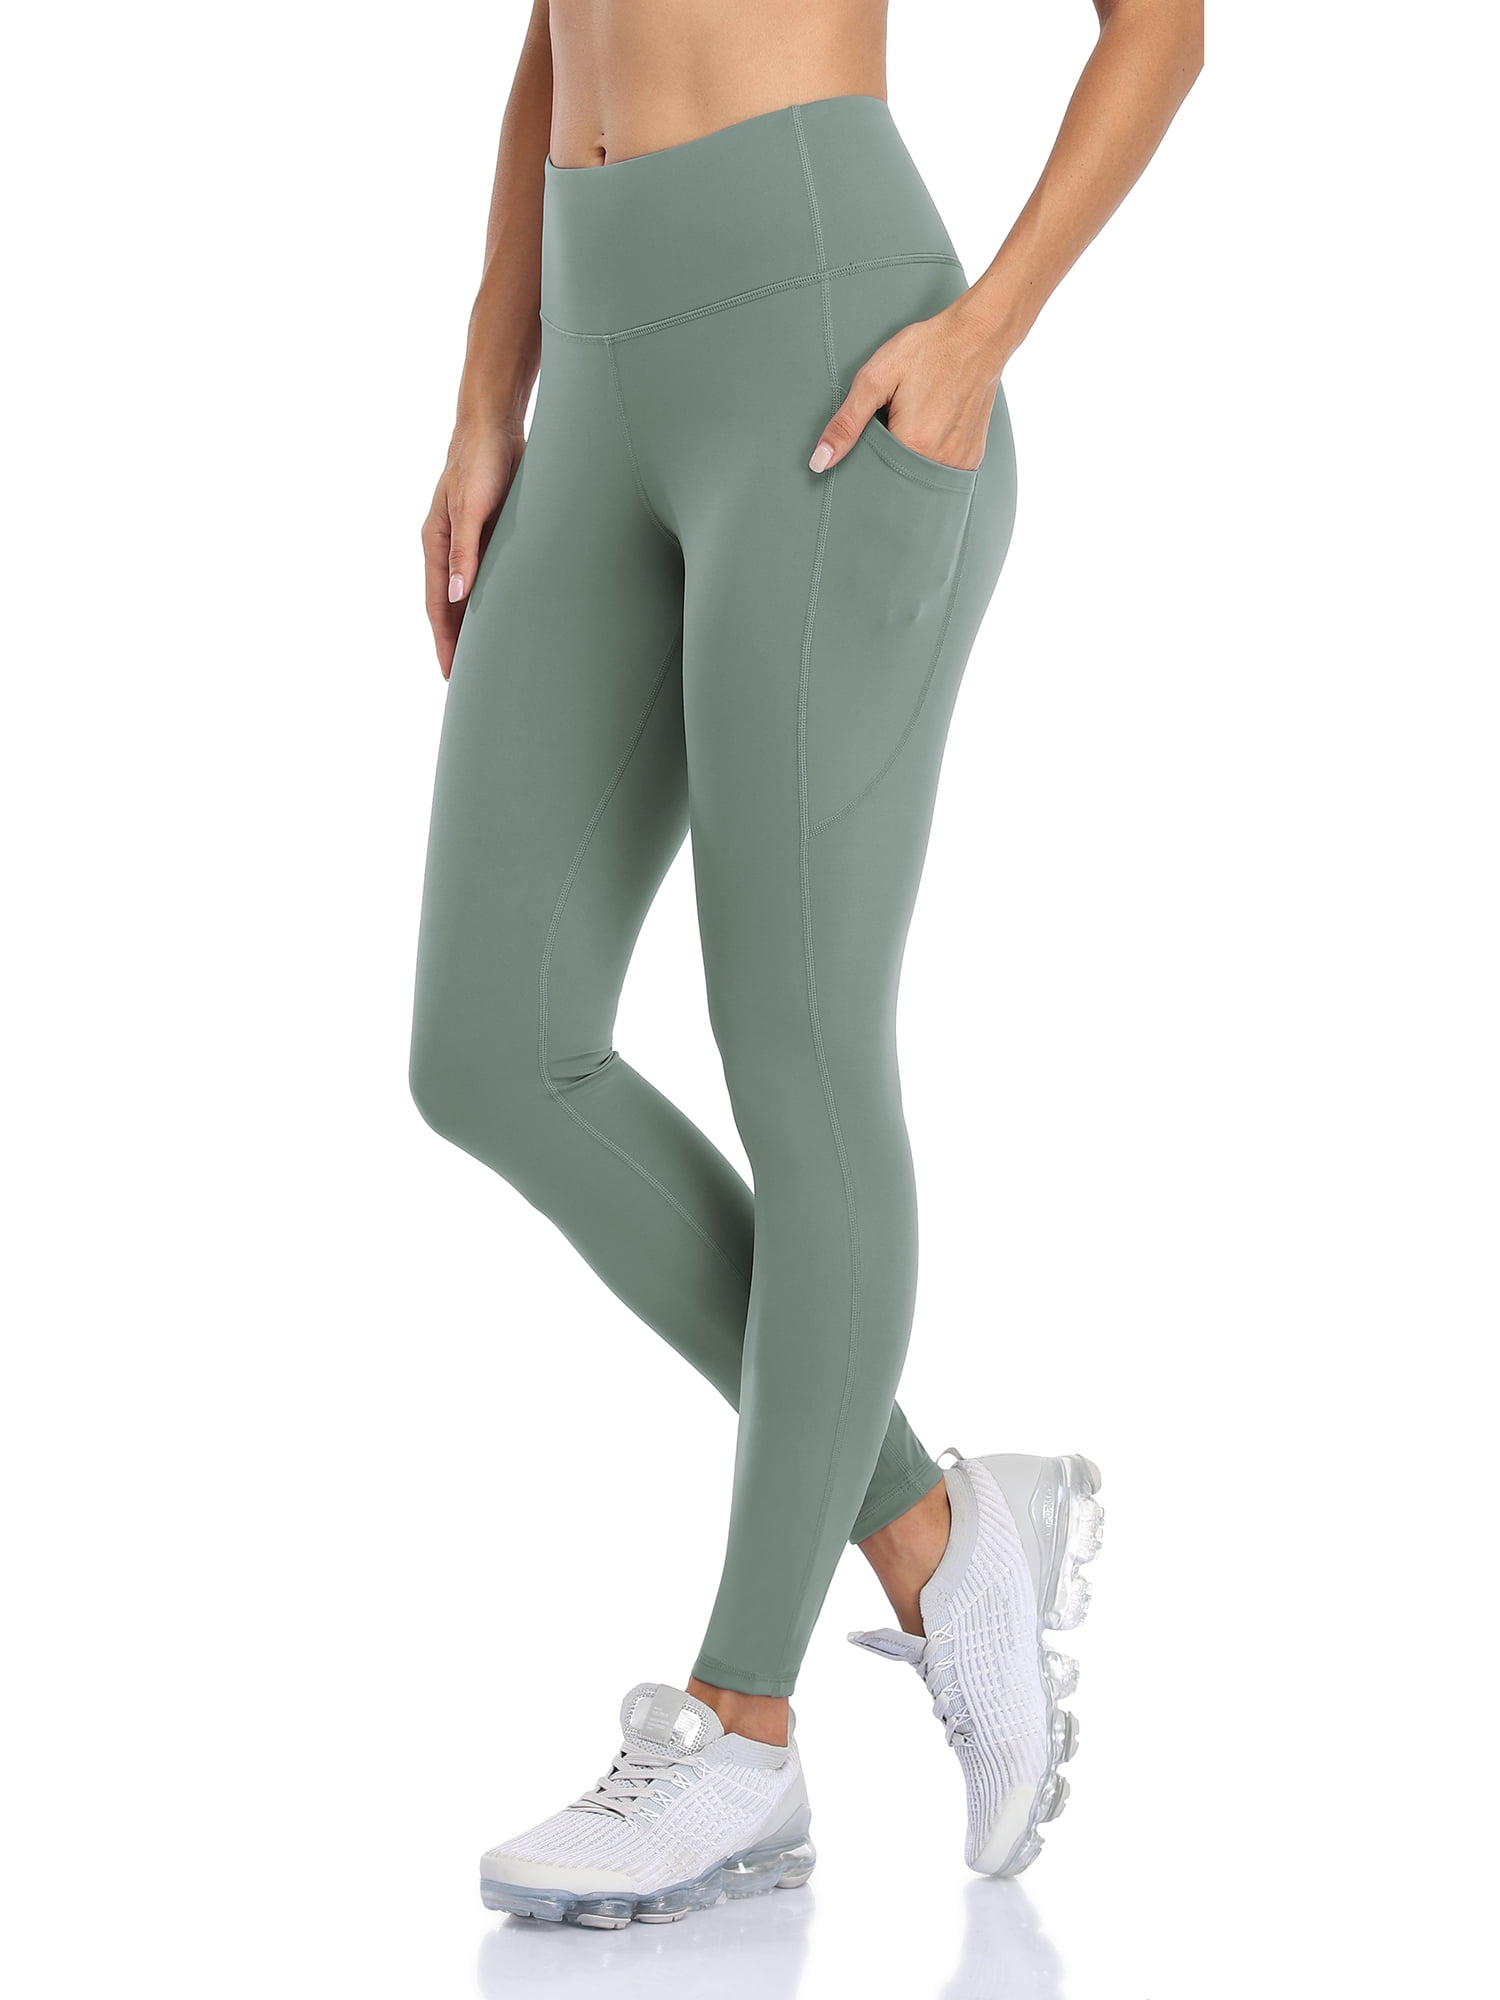 Women's High Rise Tight Yoga Pants Buttery Soft Legging With Hidden Pocket  